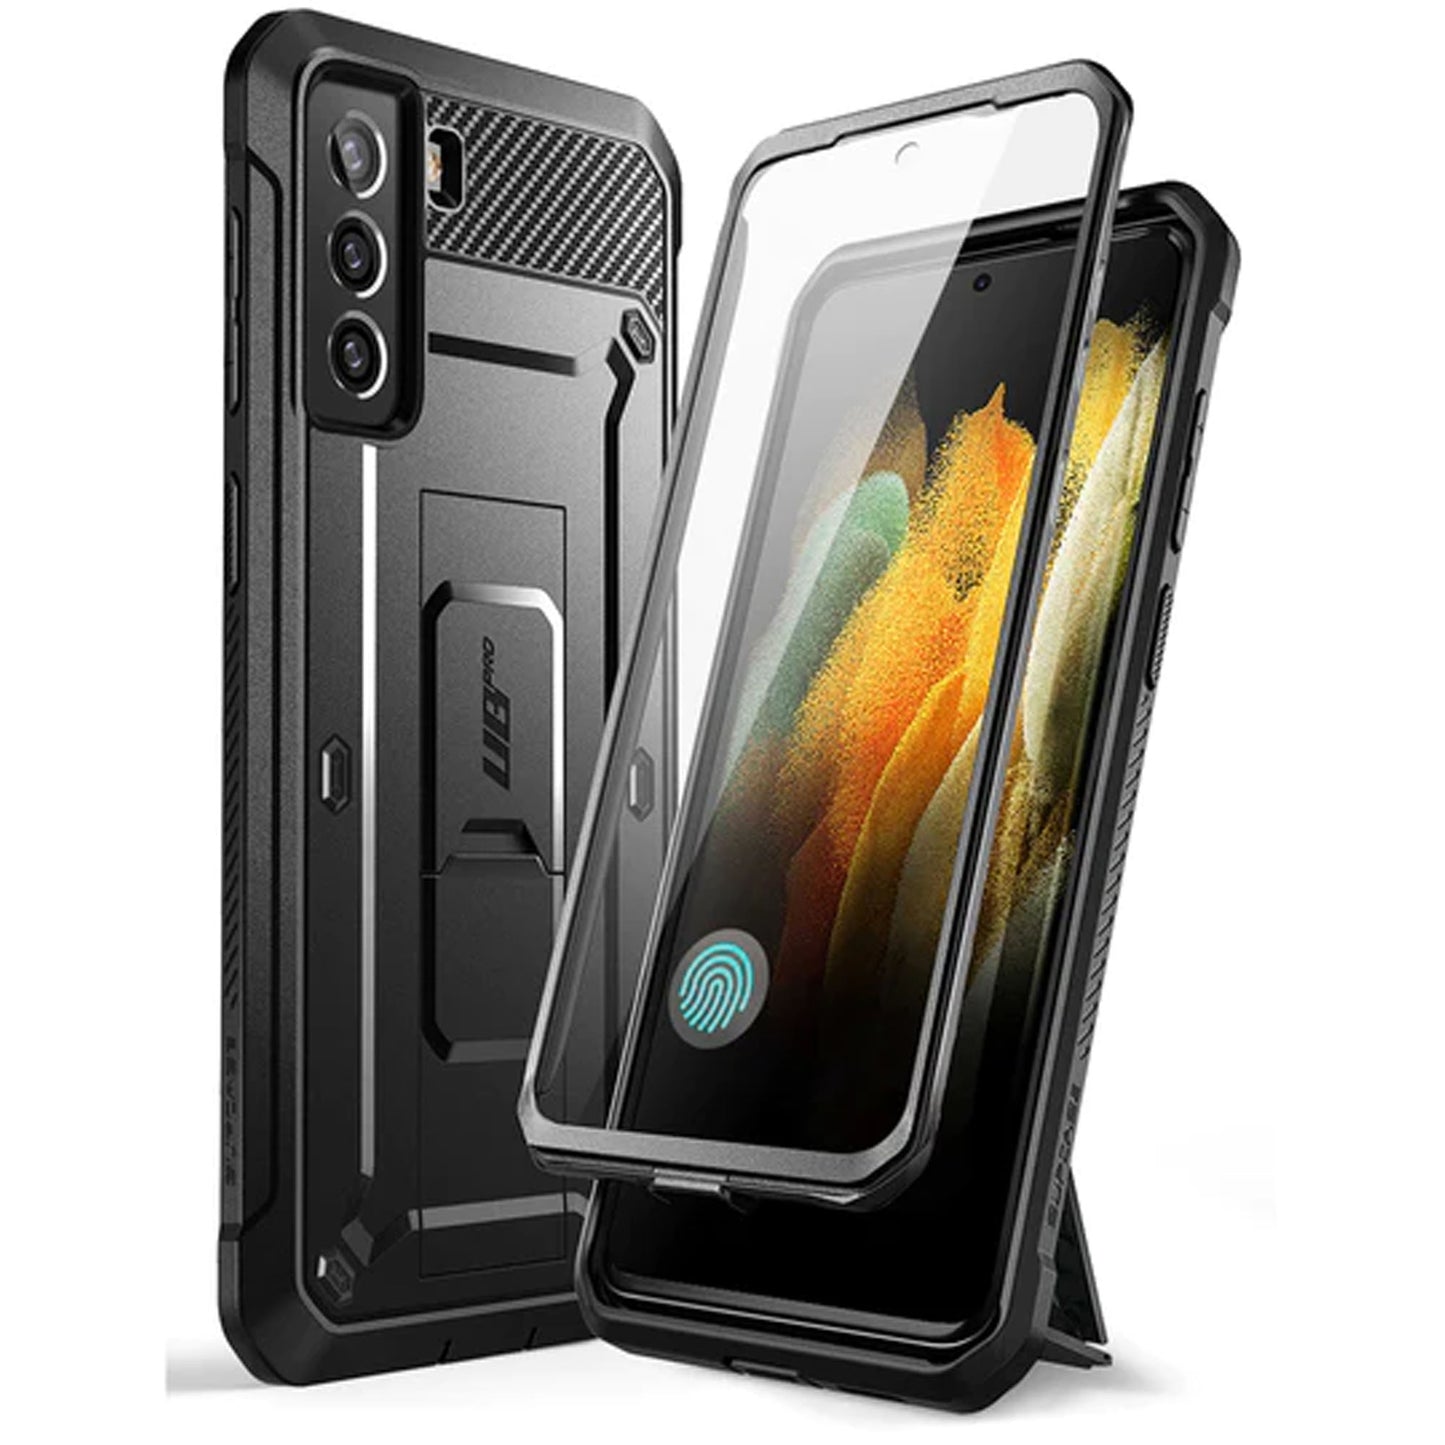 Supcase Unicorn Beetle Pro Rugged Case for Samsung Galaxy S21 - Black (Barcode: 843439135390 )